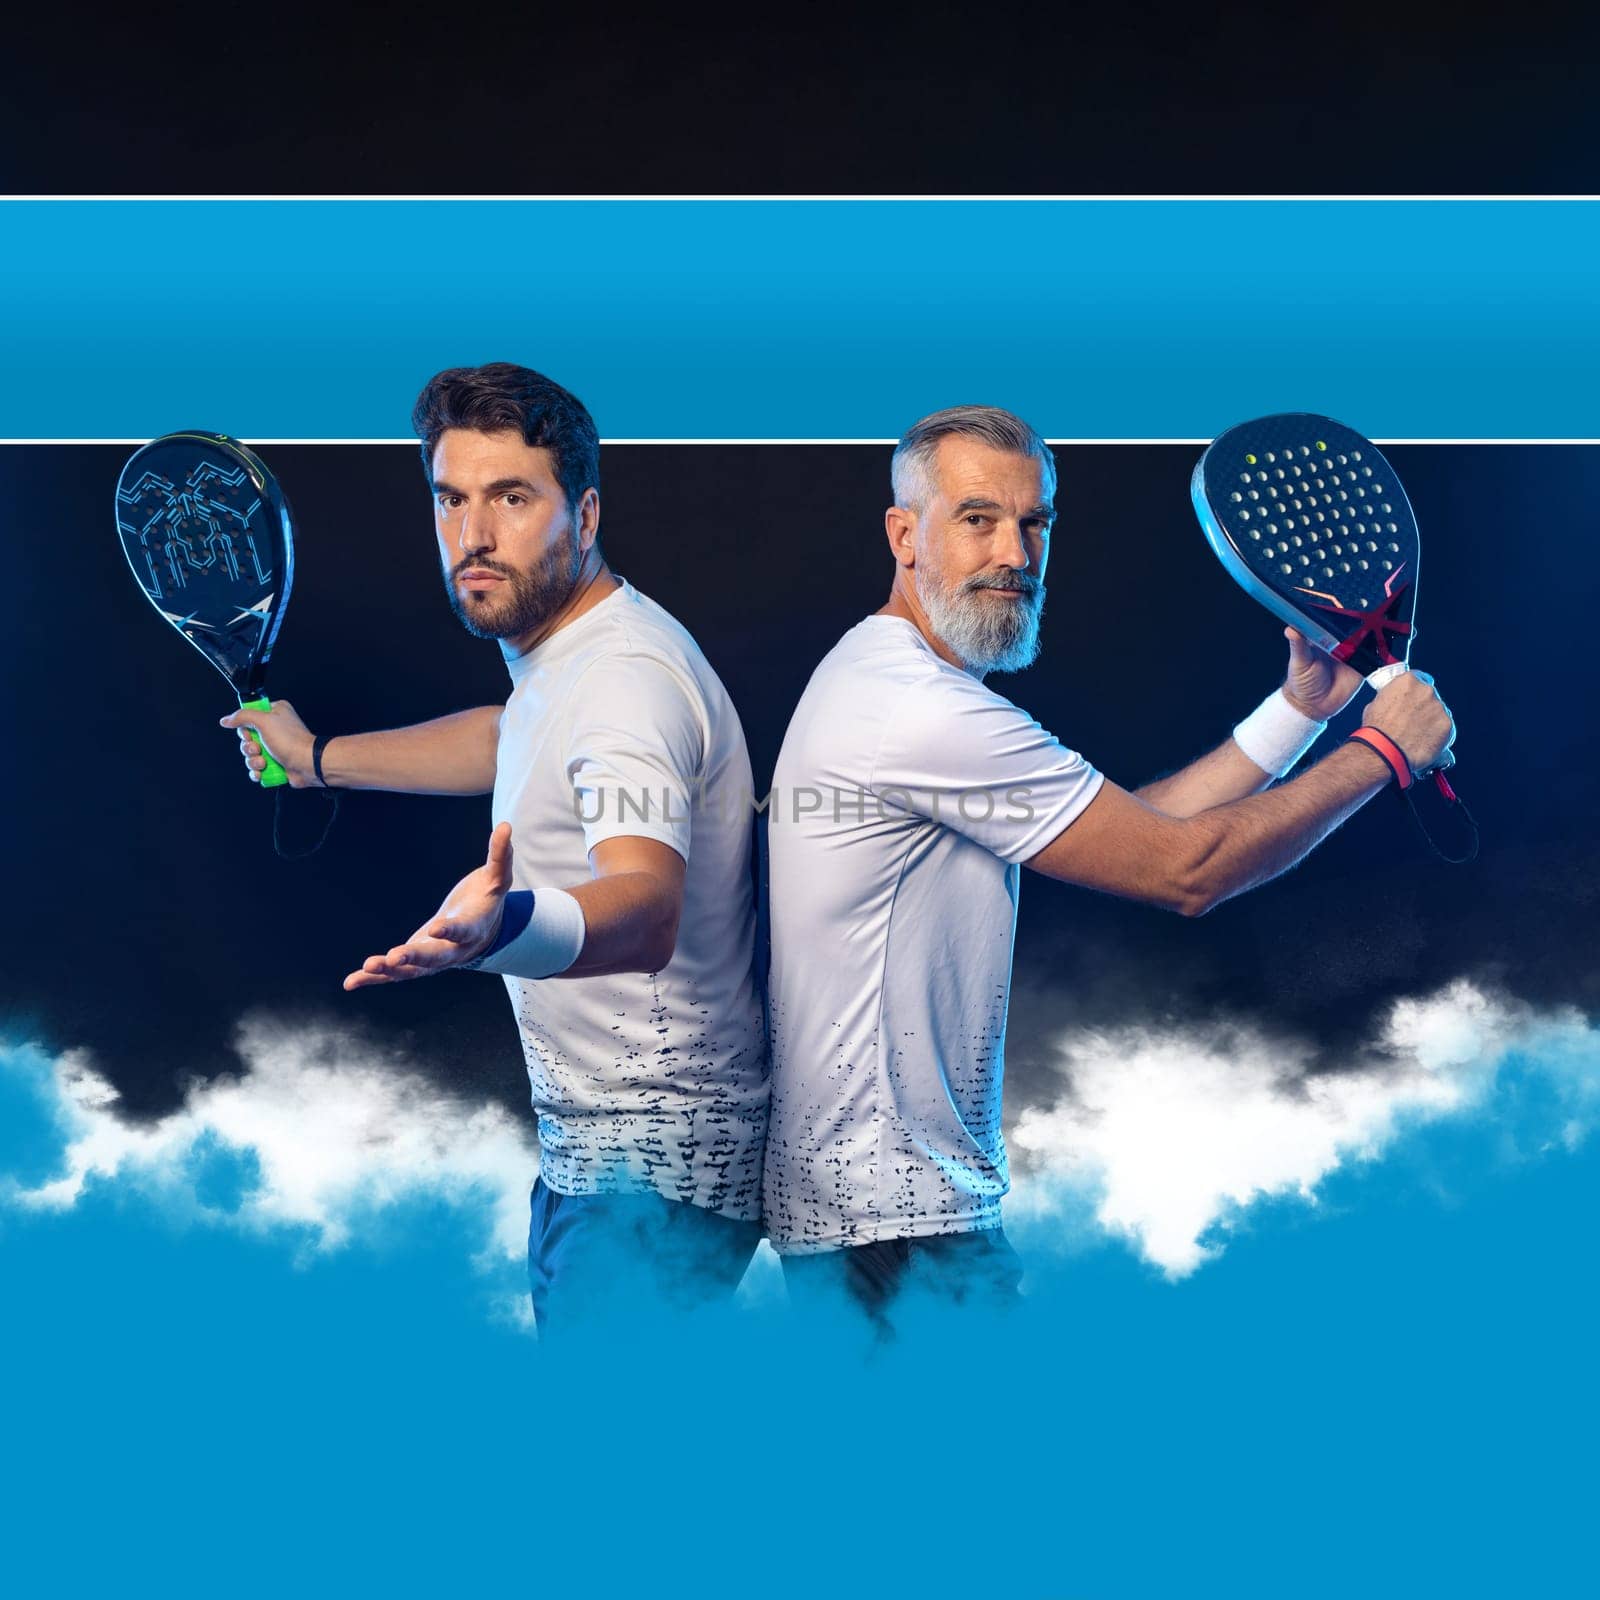 Padel tennis doubles. Two athletes players with racket. Man athlete with paddle racket on court with neon colors. Sport concept. Download a high quality photo for the design of a sports app by MikeOrlov